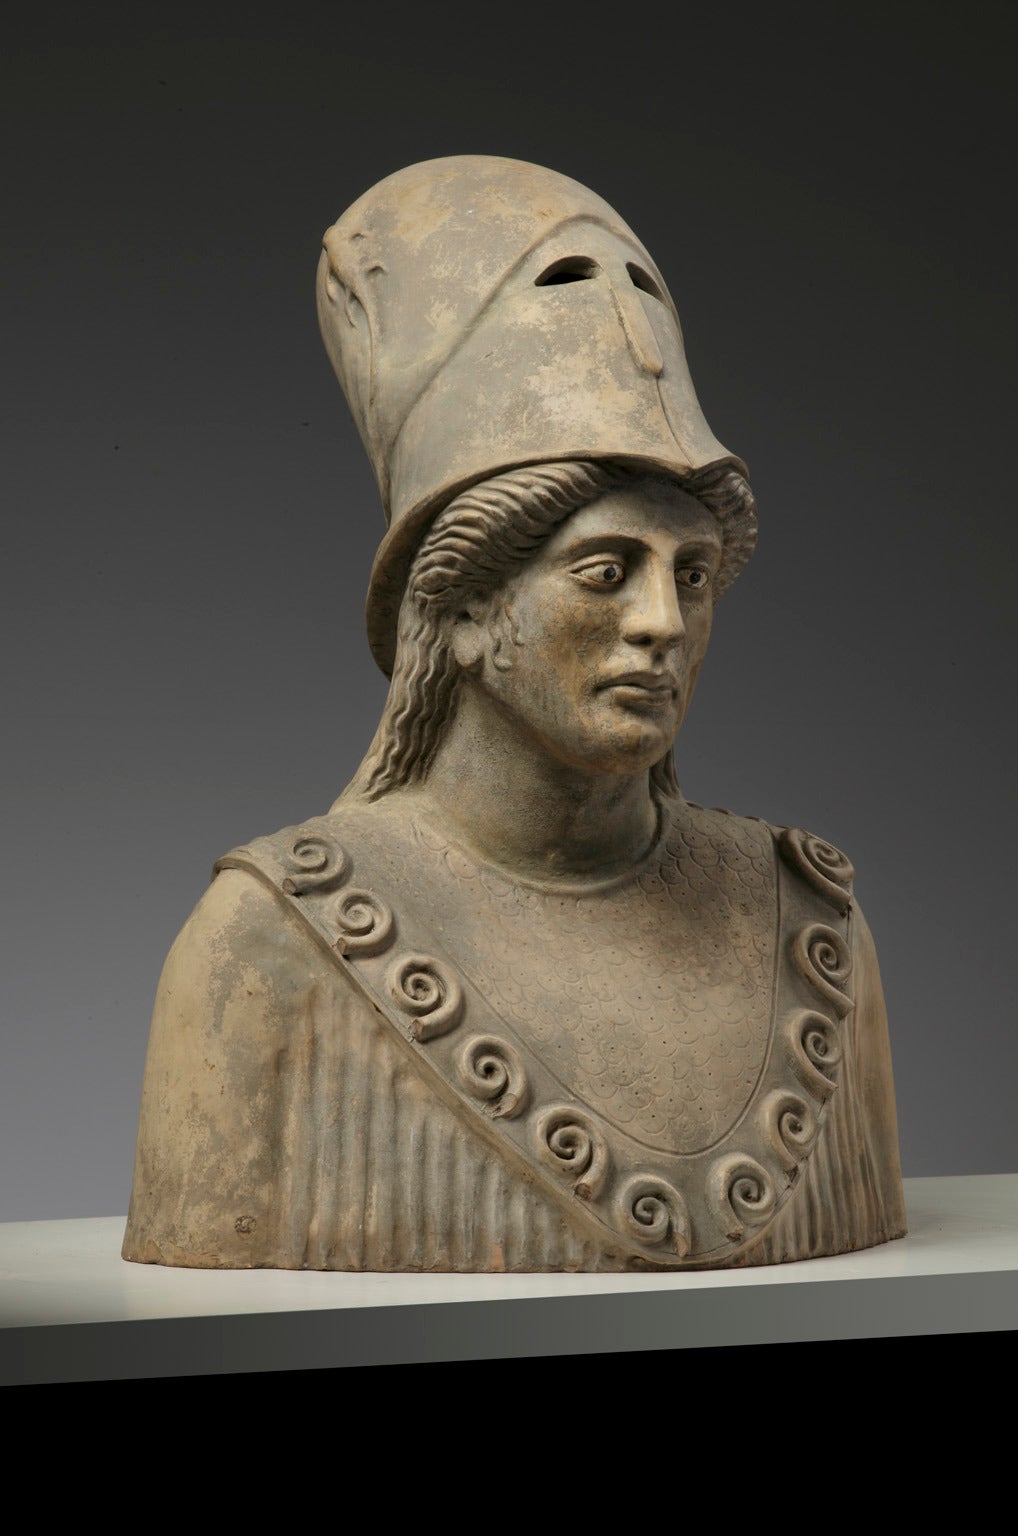 in the manner of antique examples, the helmet modelled with a lizard in relief pushed back, the 'chiton' with scrollwork to the 'decolletage'.

This bust bears similarities to the 'Athena Giustiniani', a Roman marble of the late 5th - early 4th